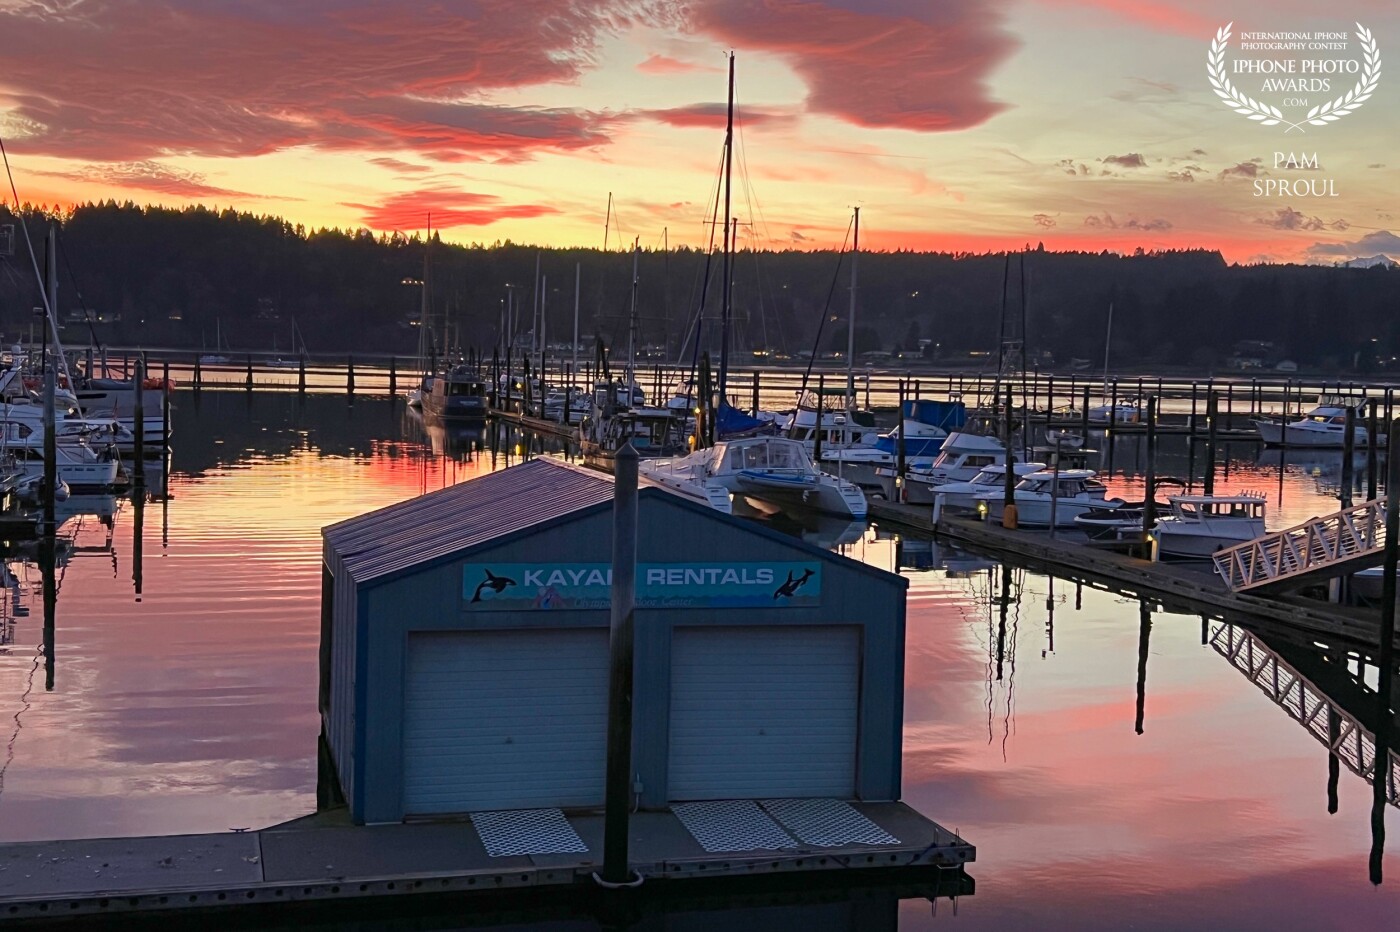 This amazing pink spring sunrise on Liberty Bay Marina kept deepening and developing as I walked on the shoreline. Very happy my iPhone allowed me to capture this colorful moment<br />
<br />
Liberty Bay Marina sunrise view ~ 2022